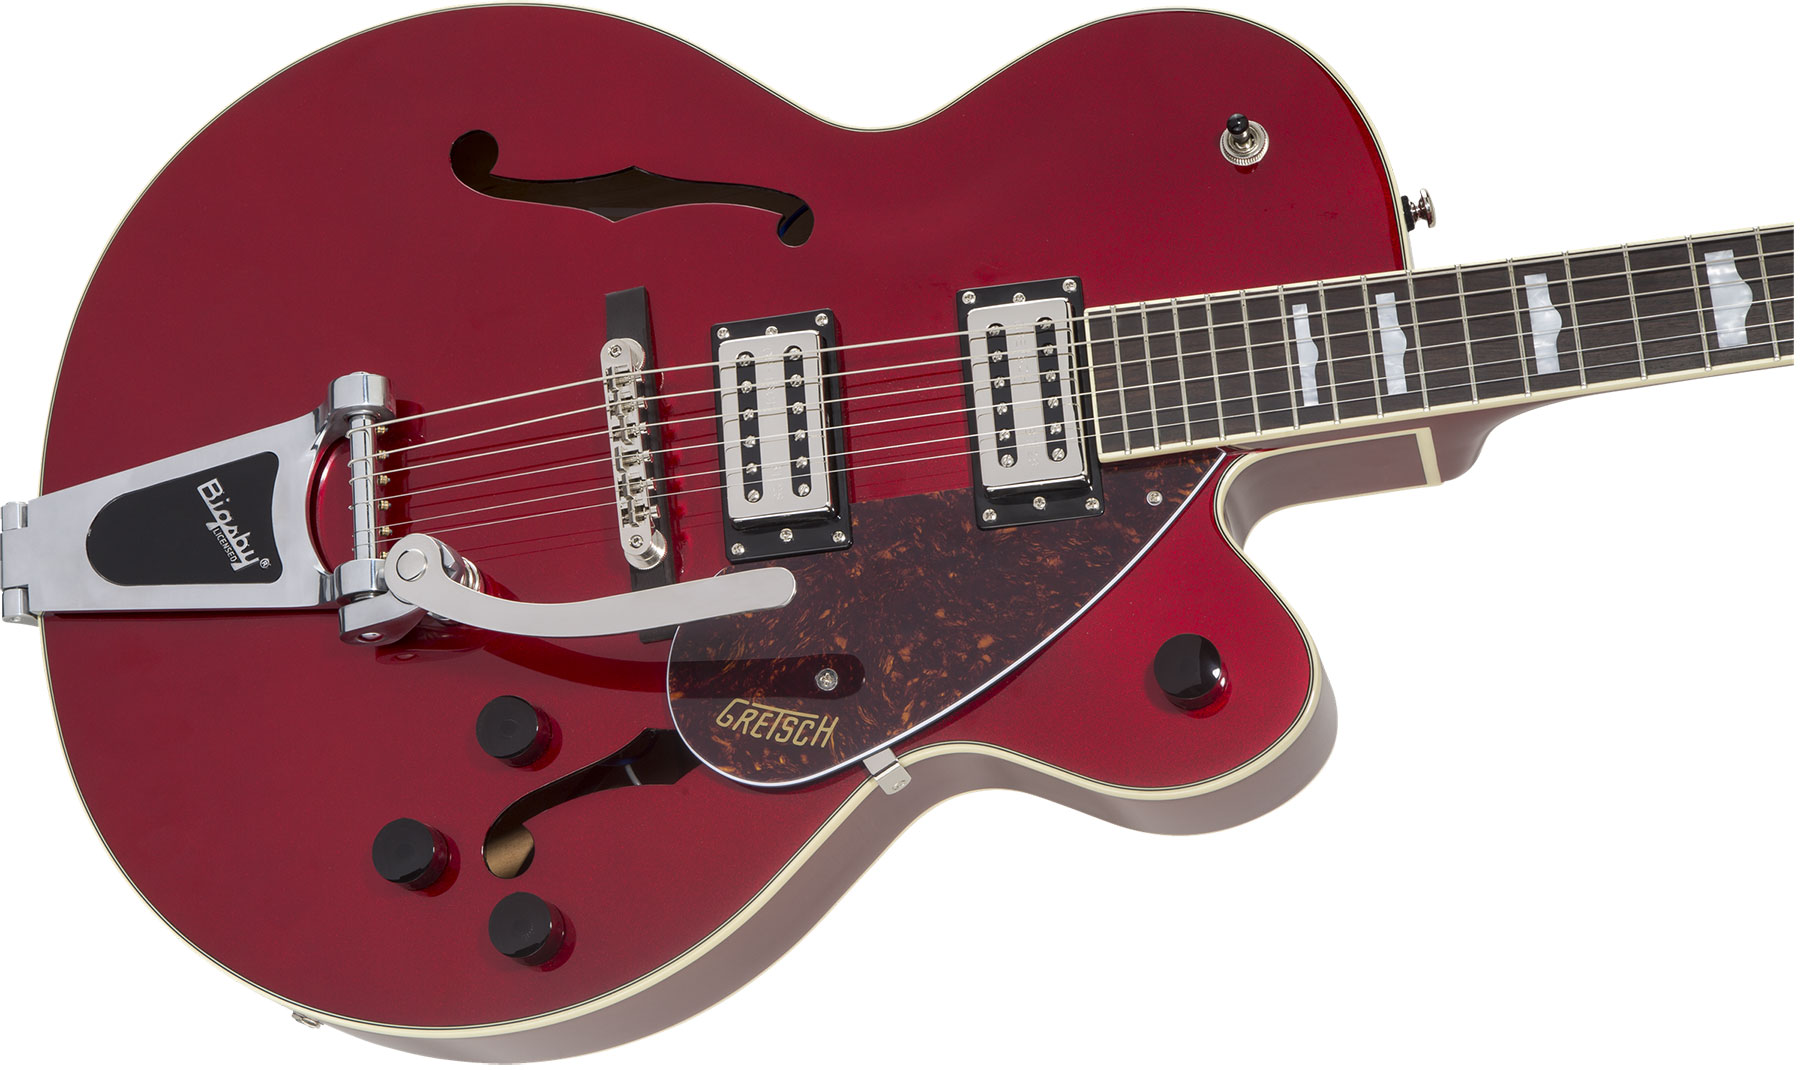 Gretsch G2420t Streamliner Hollow Body Bigsby Hh Trem Lau - Candy Apple Red - Semi-hollow electric guitar - Variation 2